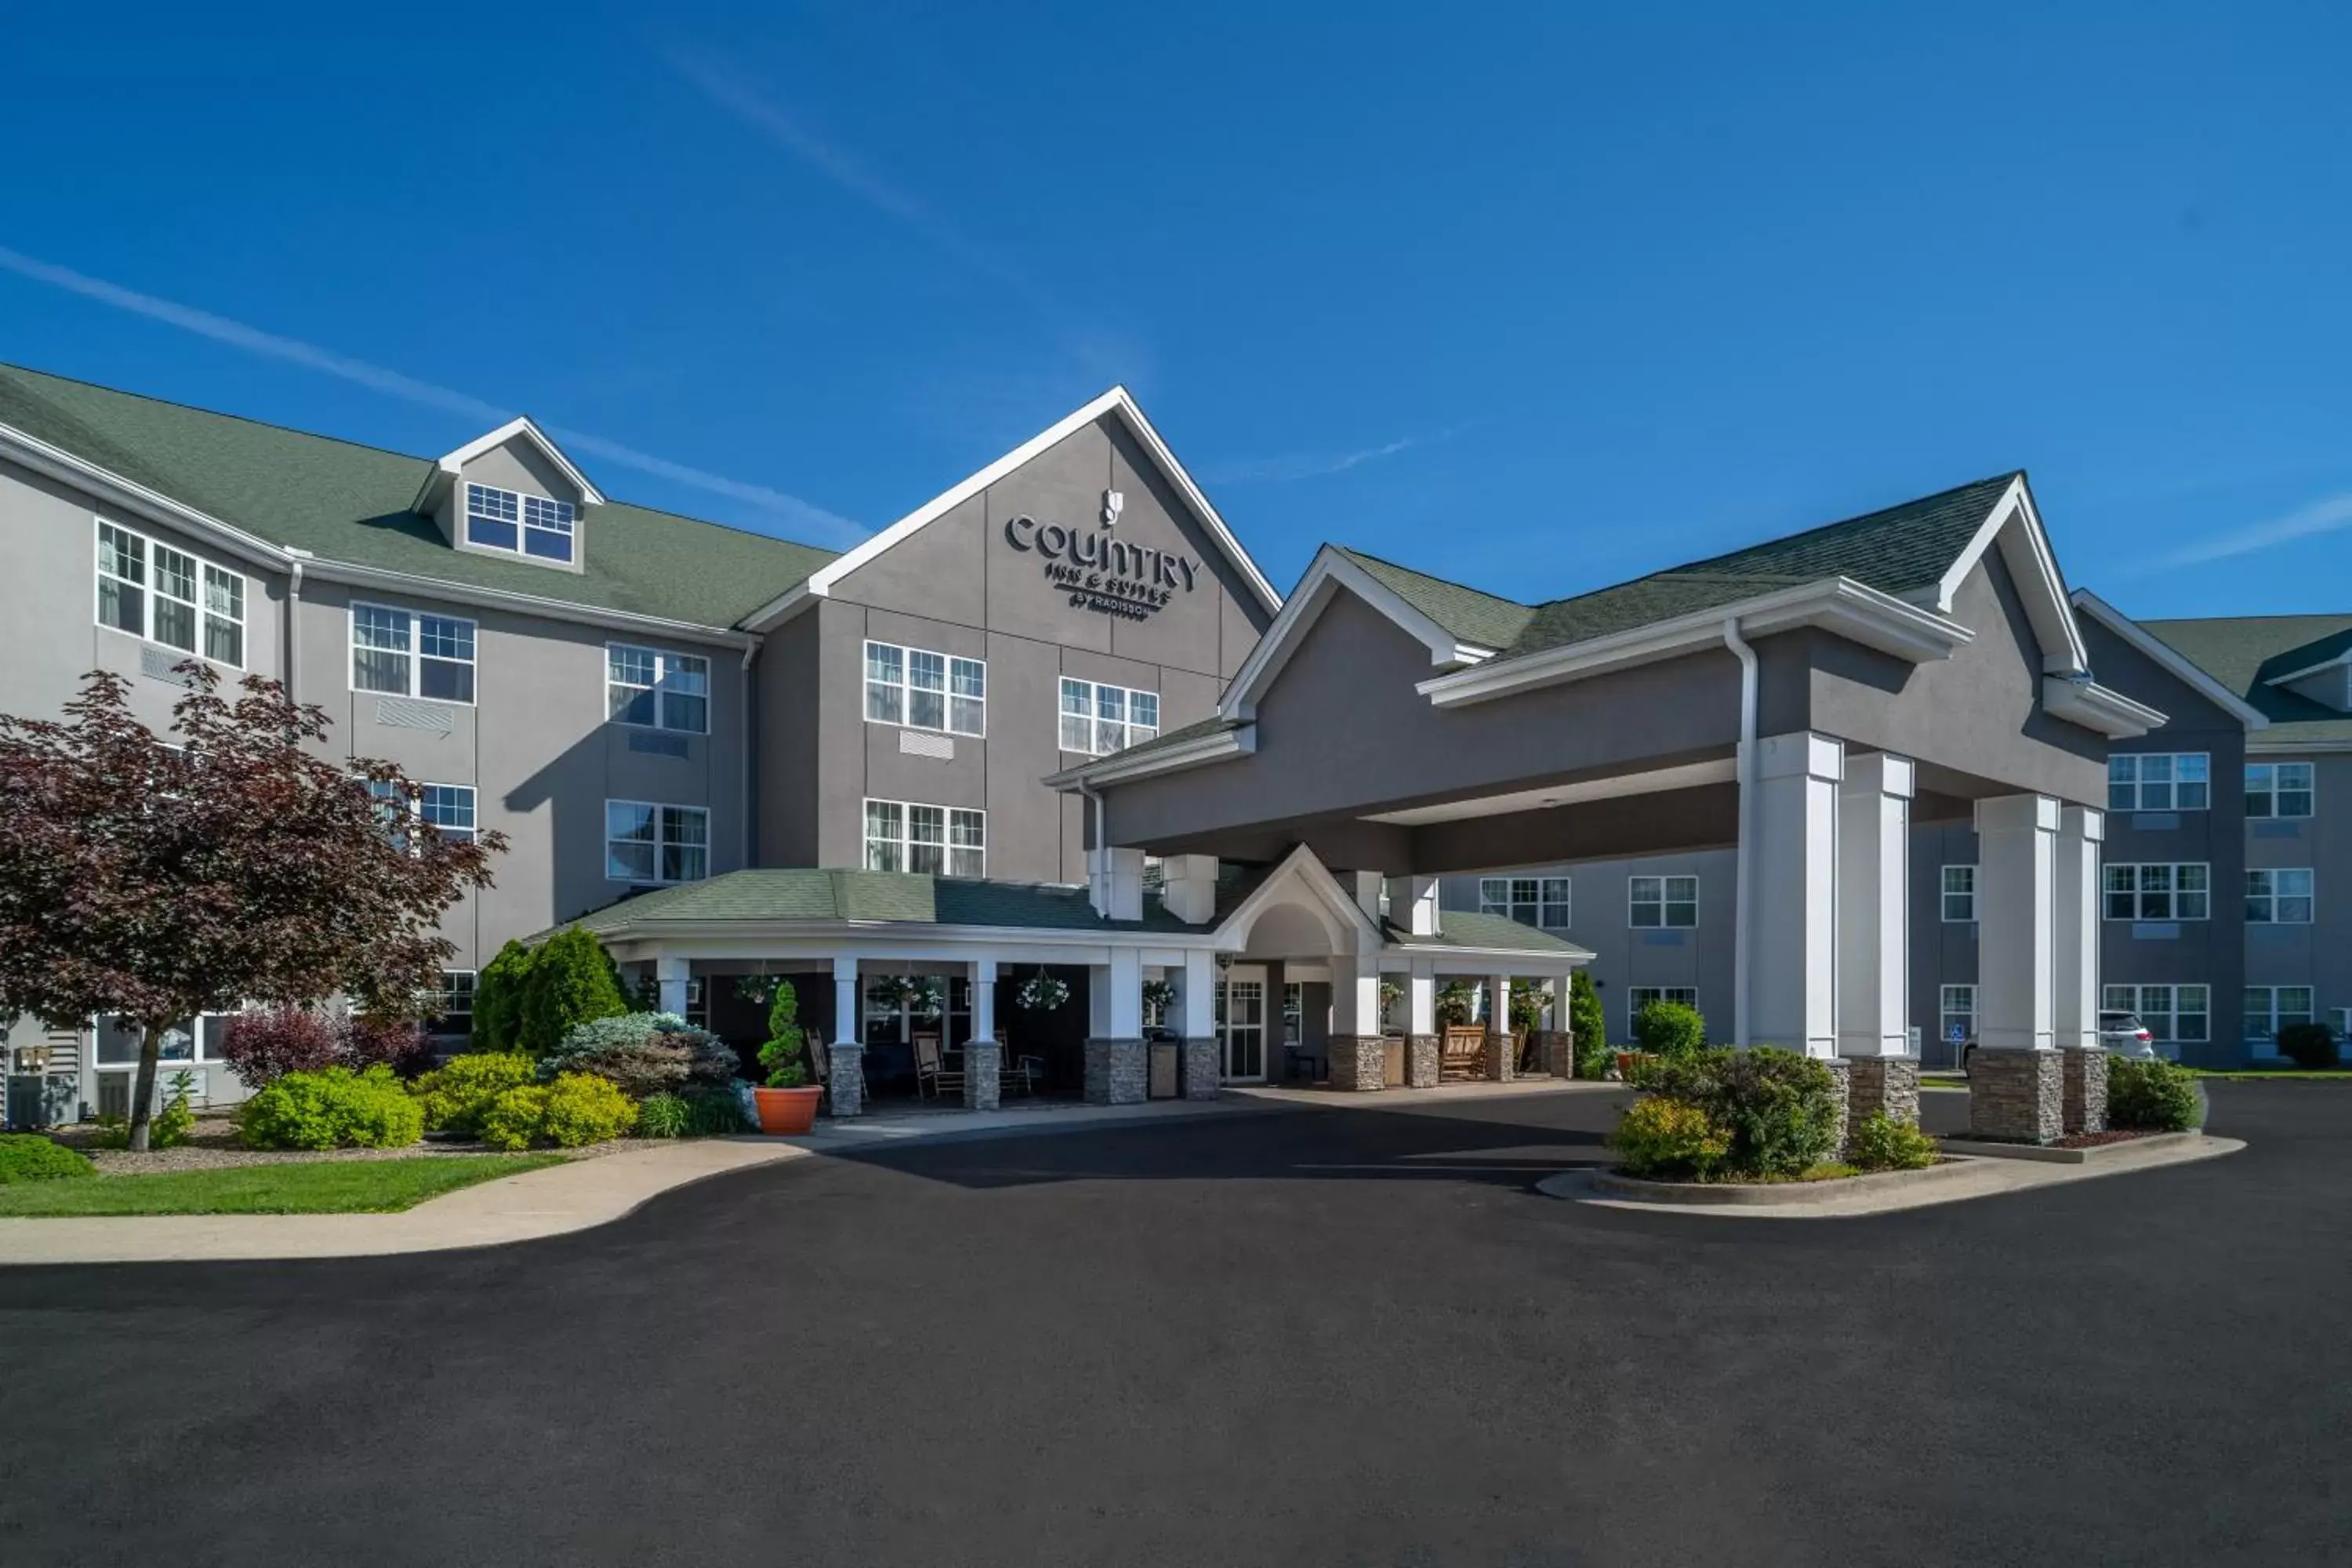 Facade/entrance, Property Building in Country Inn & Suites by Radisson, Beckley, WV